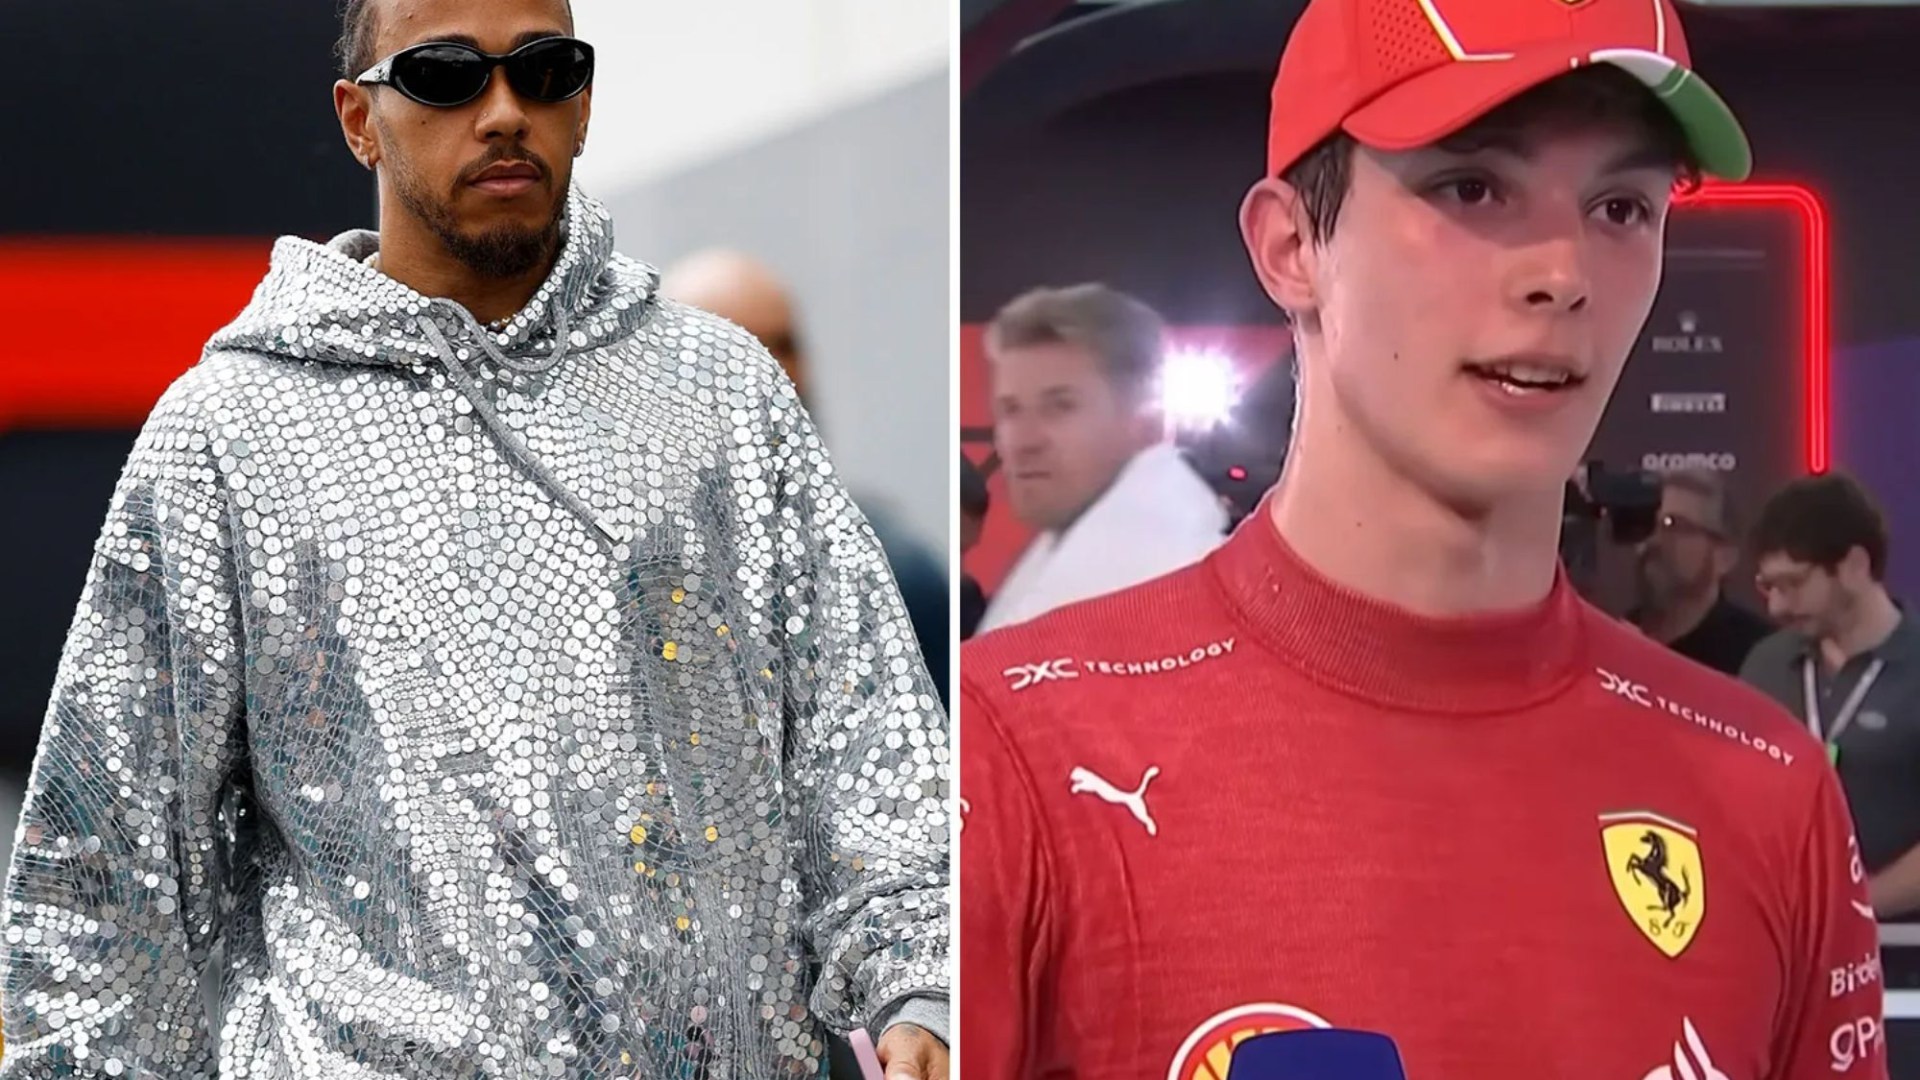 F1 teen Ollie Bearman to join Haas in 2025 after epic breakthrough – but will earn pittance compared to Lewis Hamilton [Video]